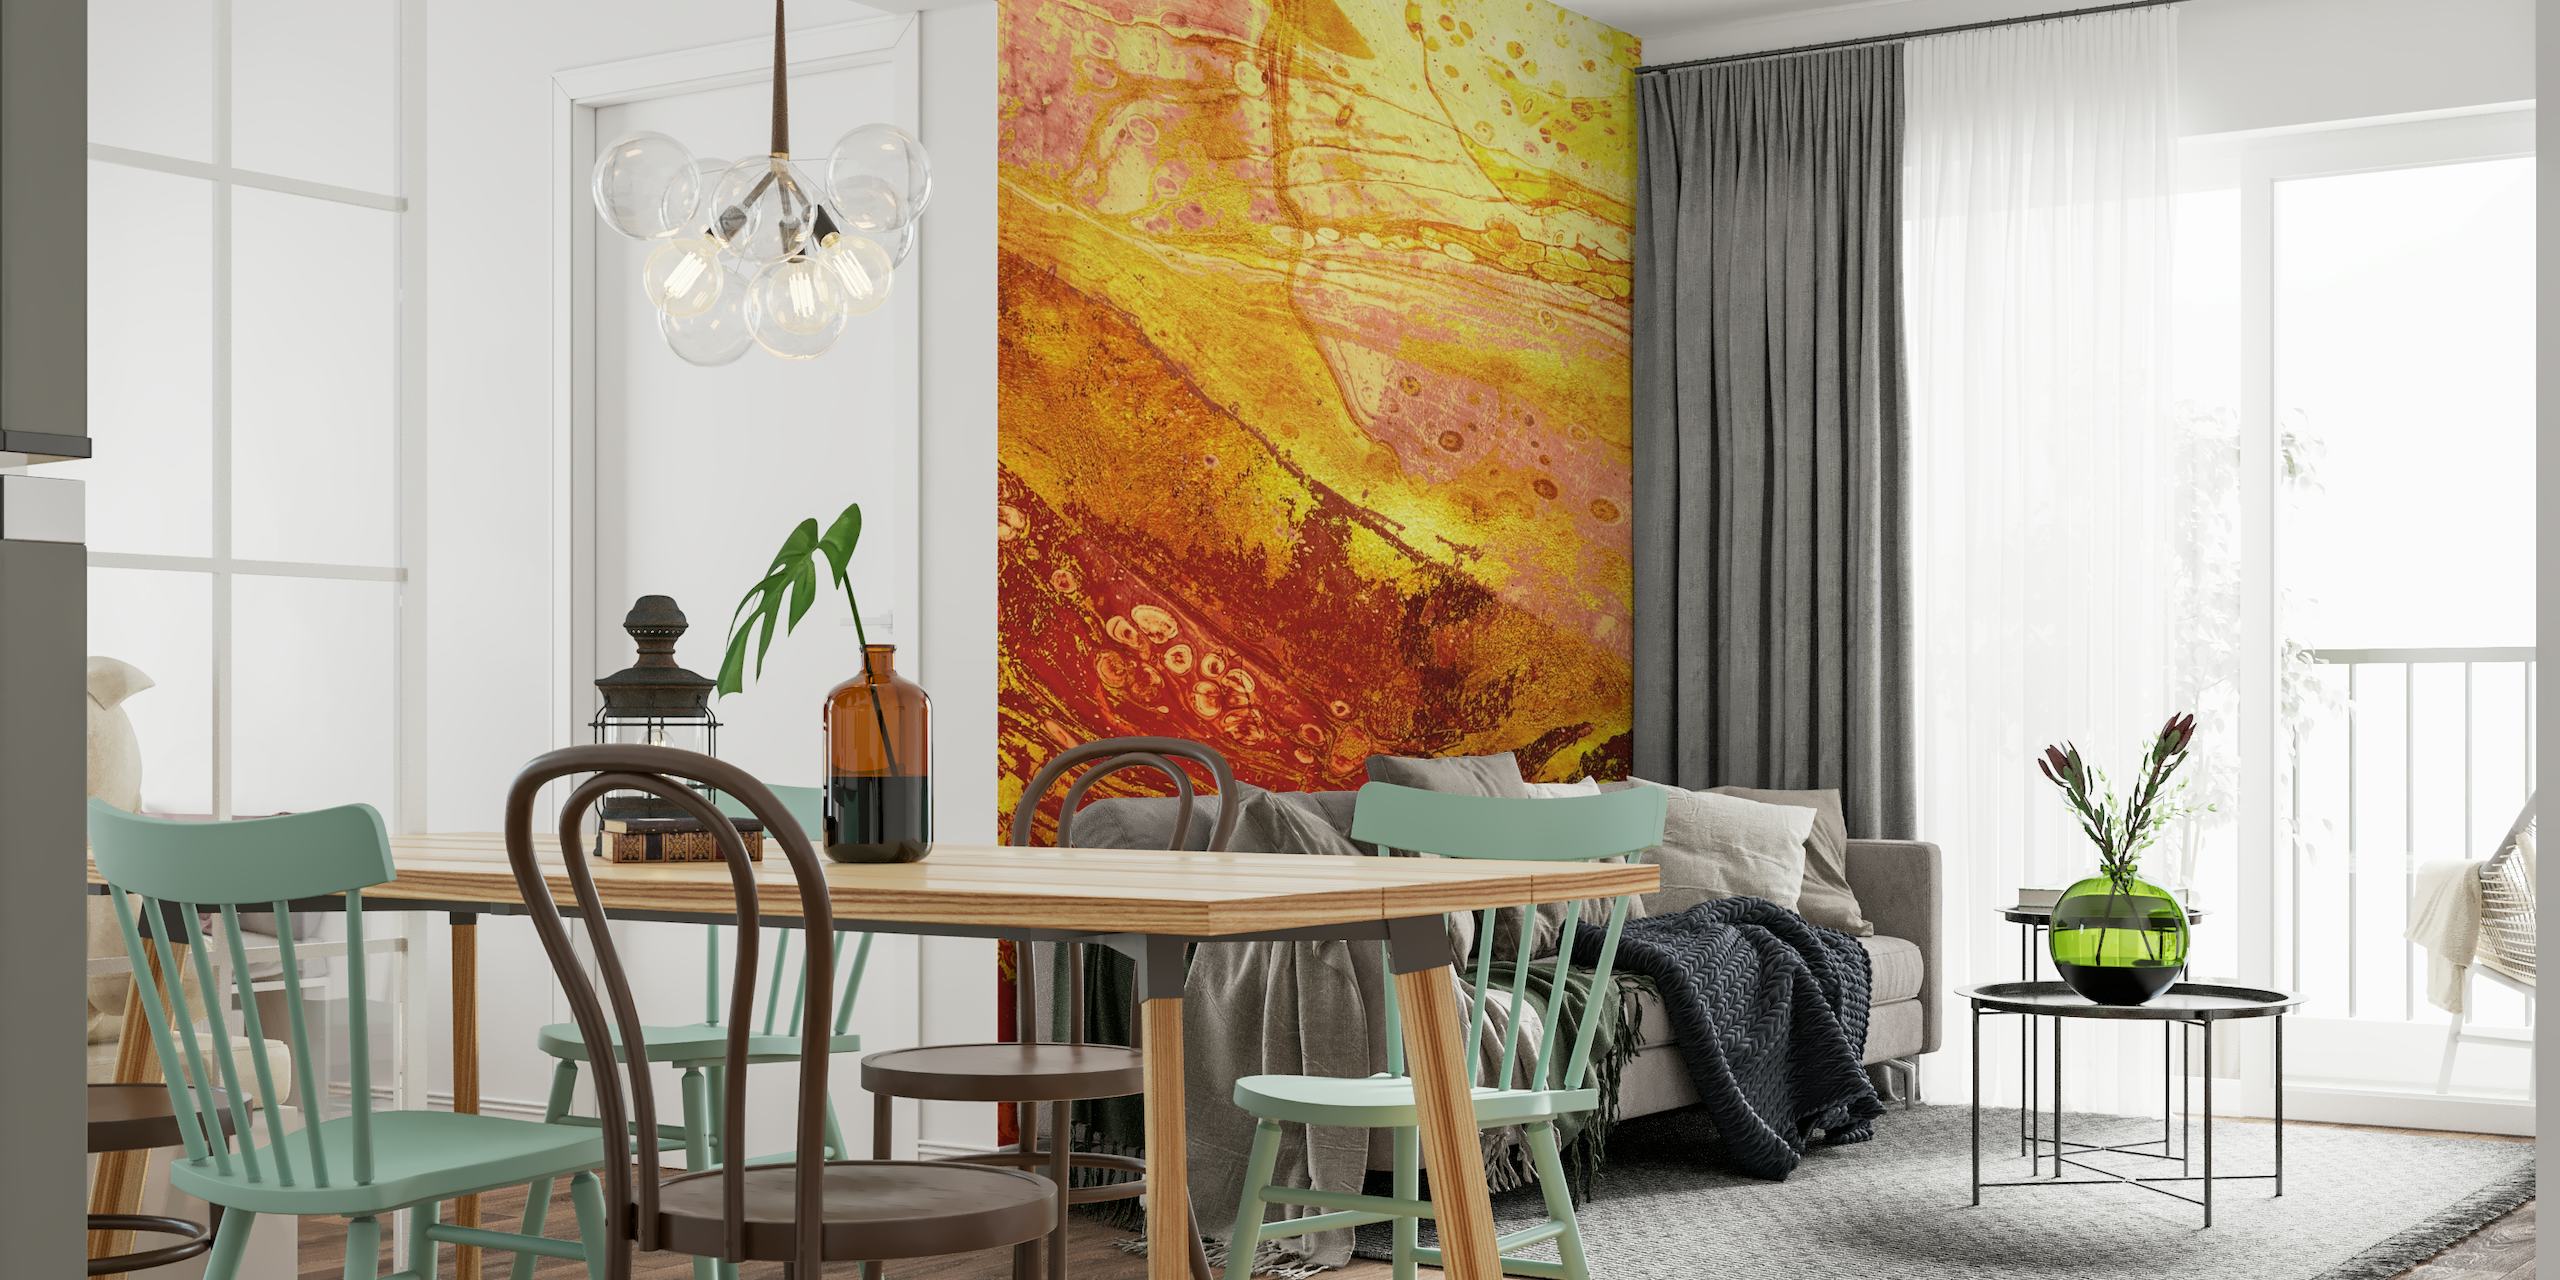 Abstract wall mural with golden and red swirls and patterns